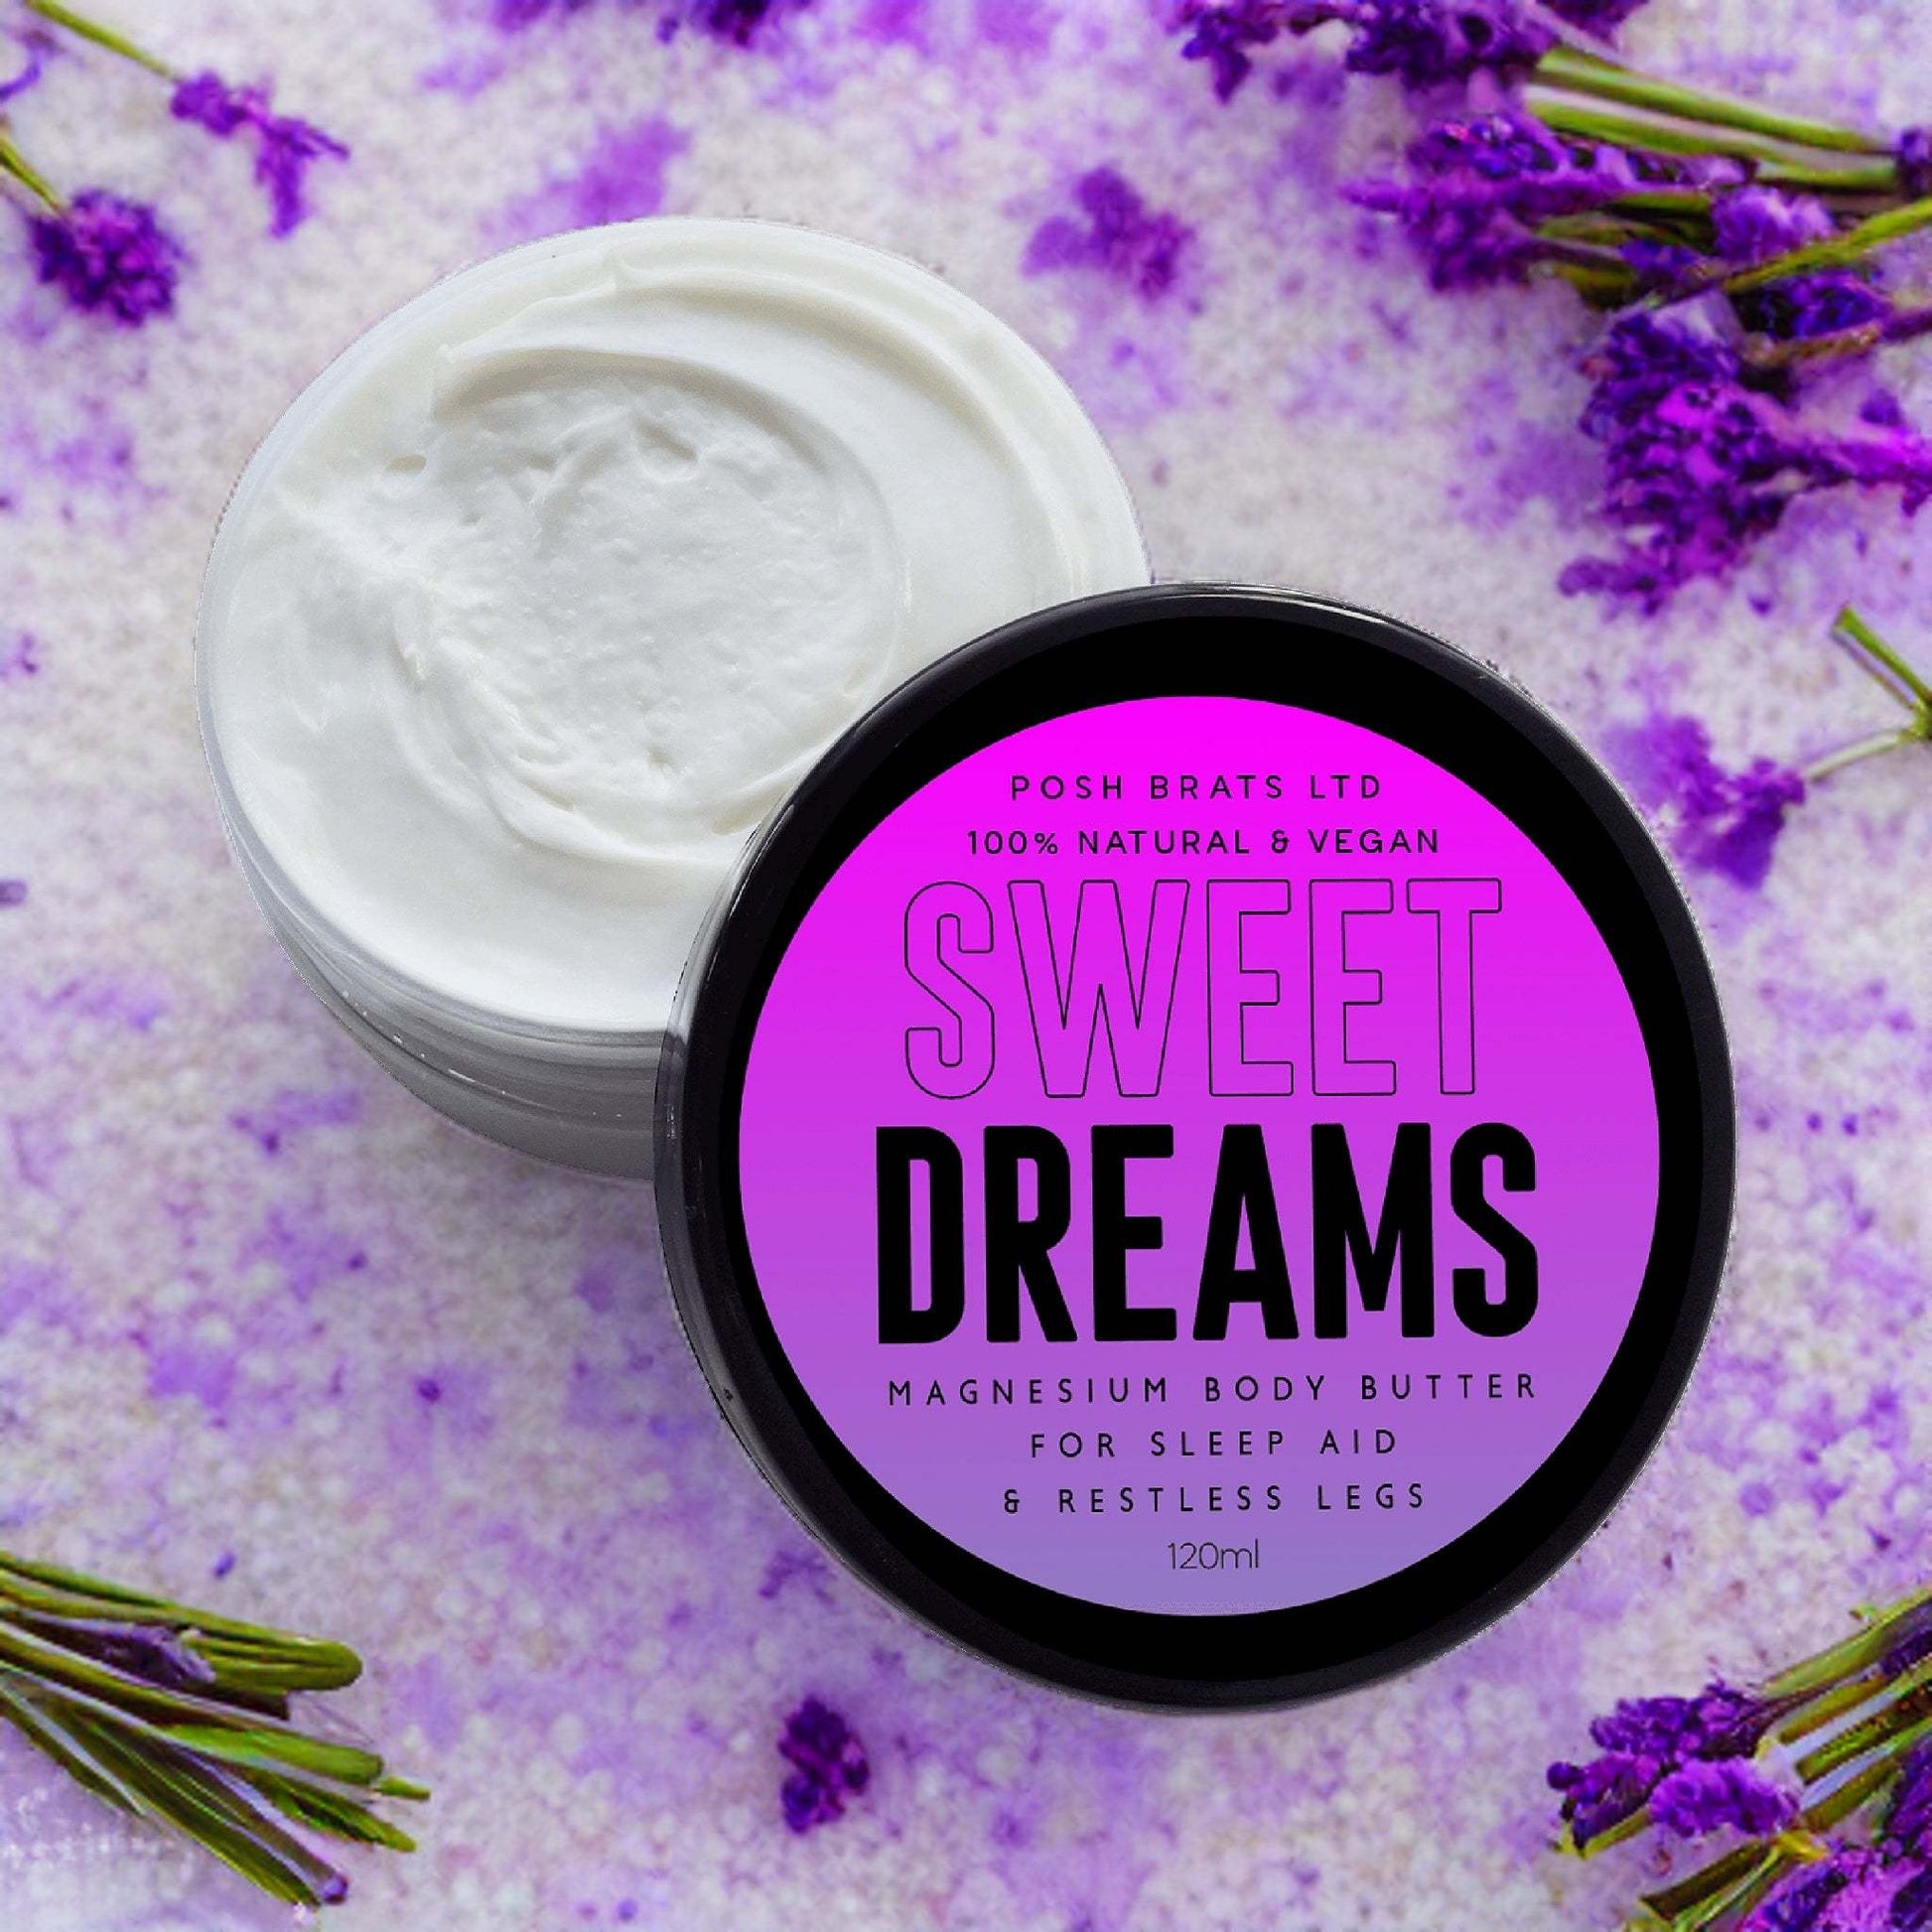 Experience tranquility with Sweet Dreams Magnesium Body Butter. Our sleep aide body butter soothes, moisturizes, and promotes restful sleep.